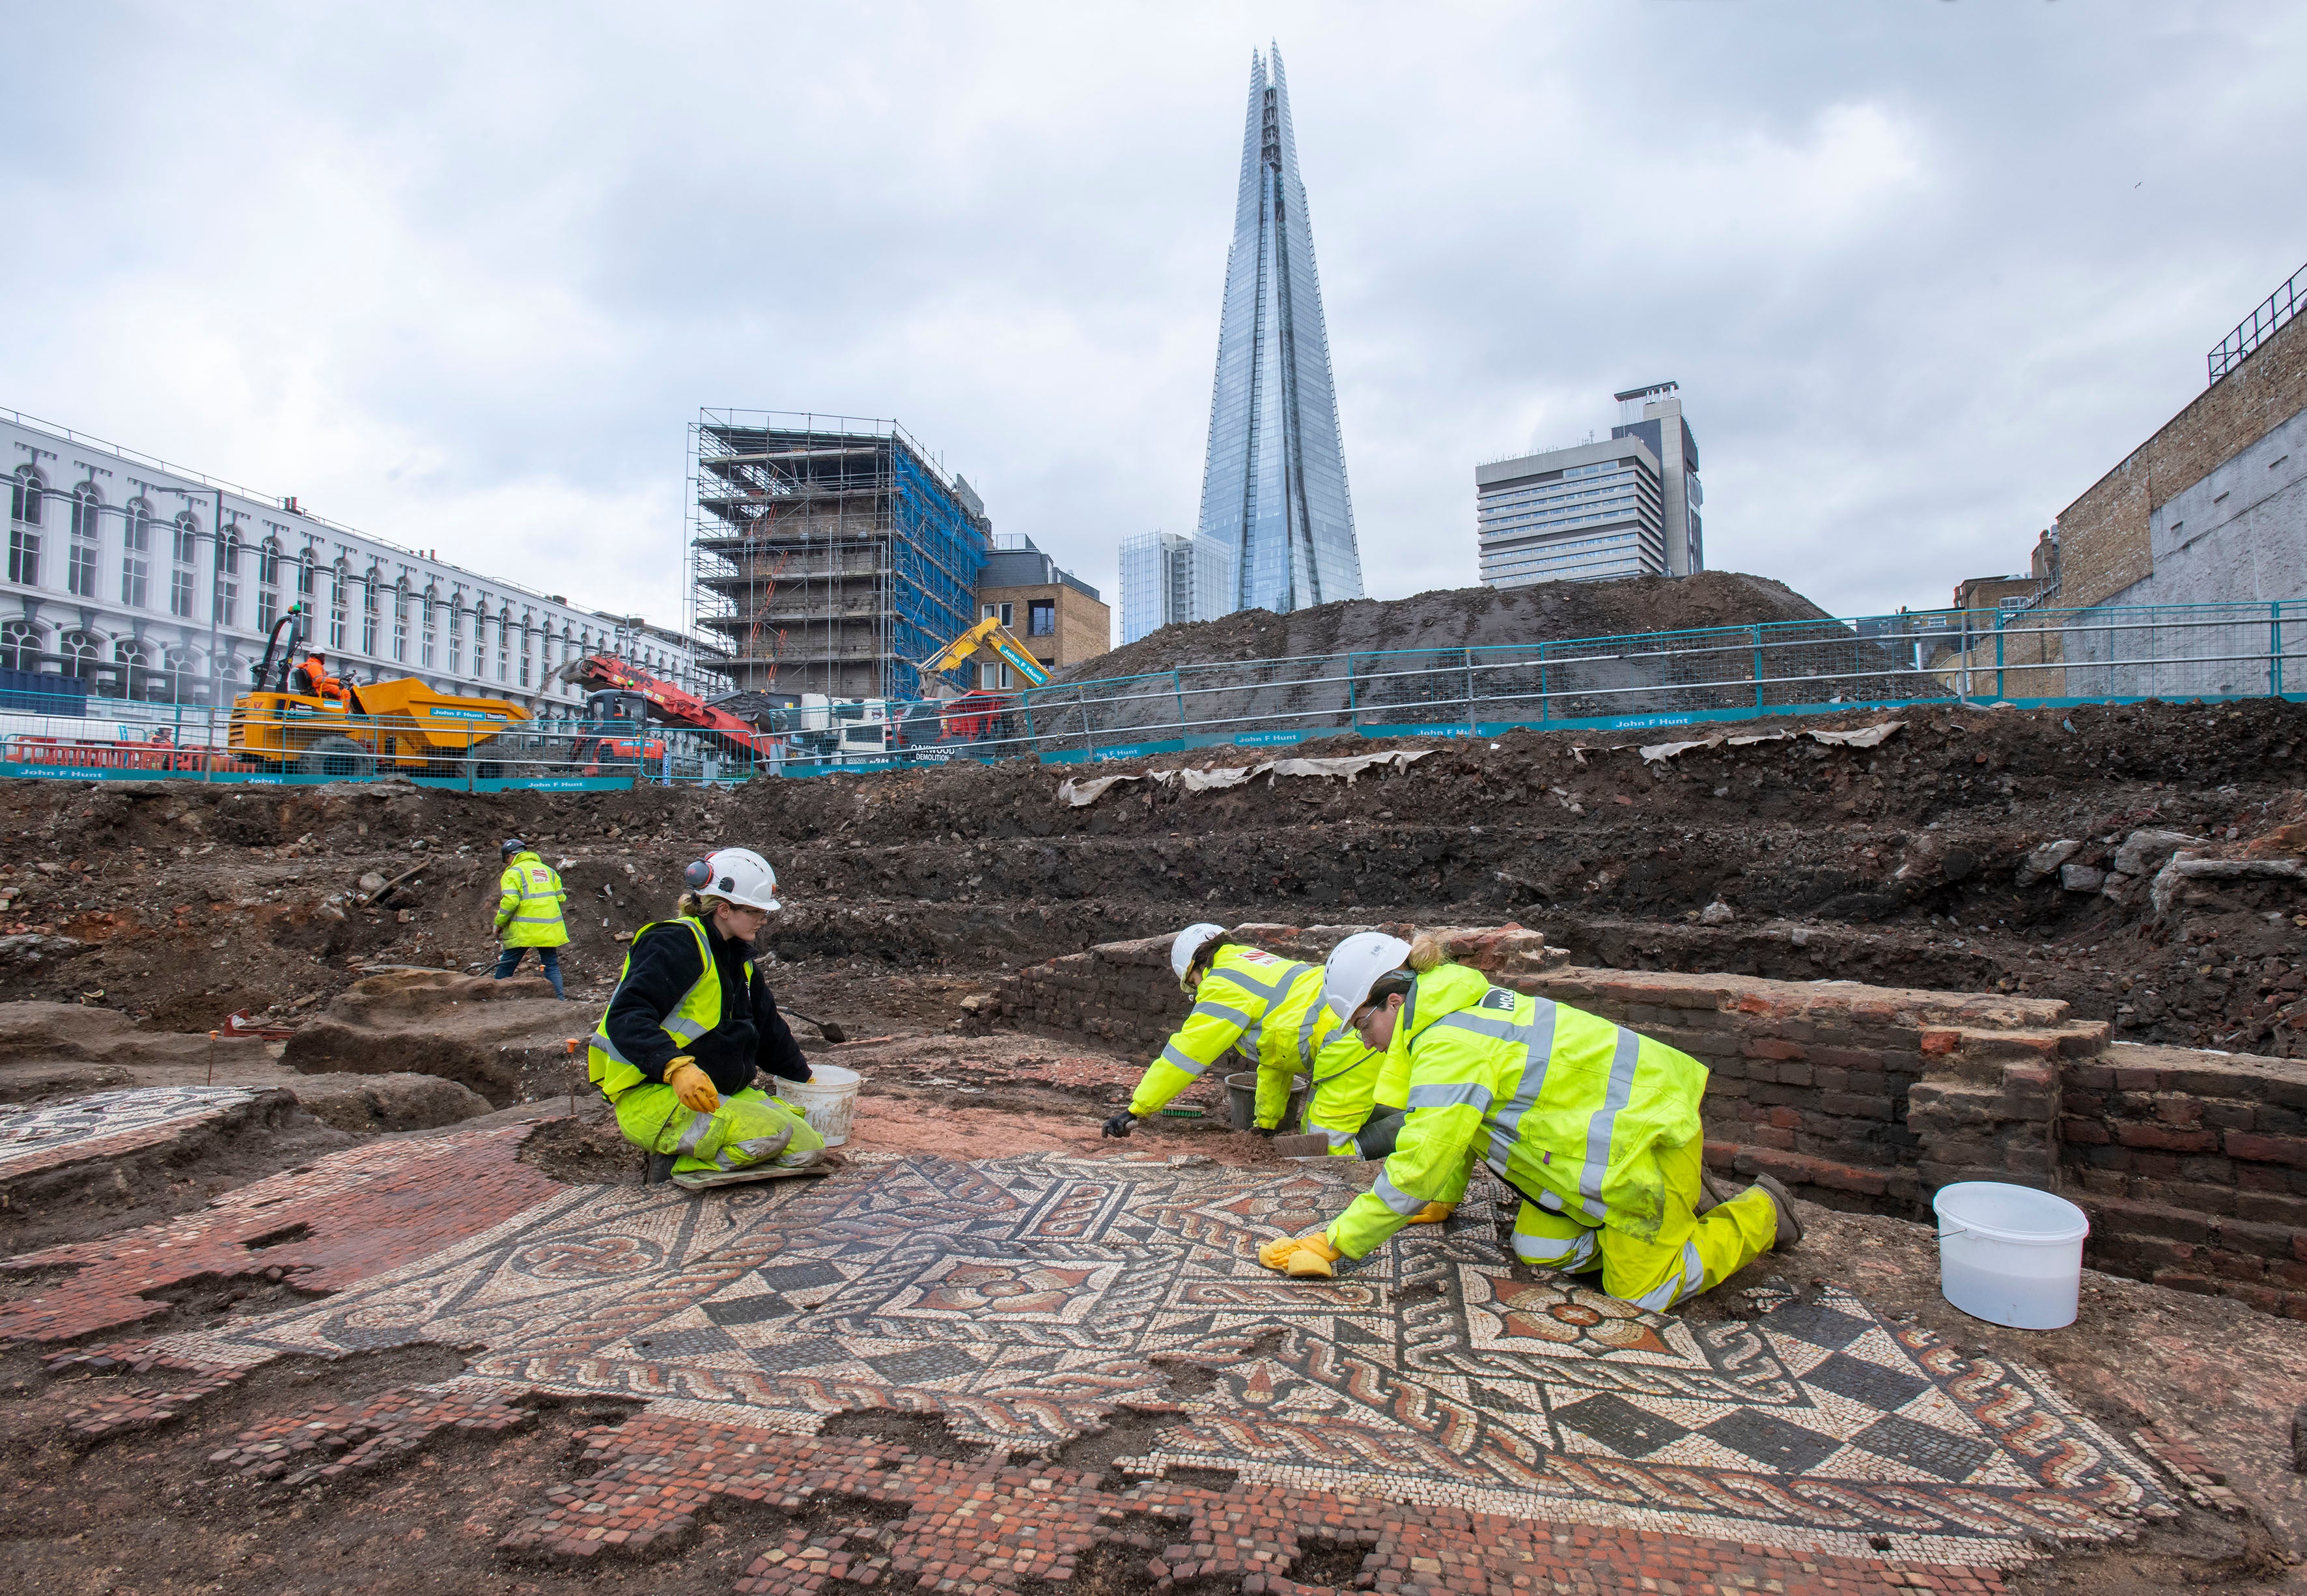 MOLA archaeologists at work on the mosaic unearthed in Southwark